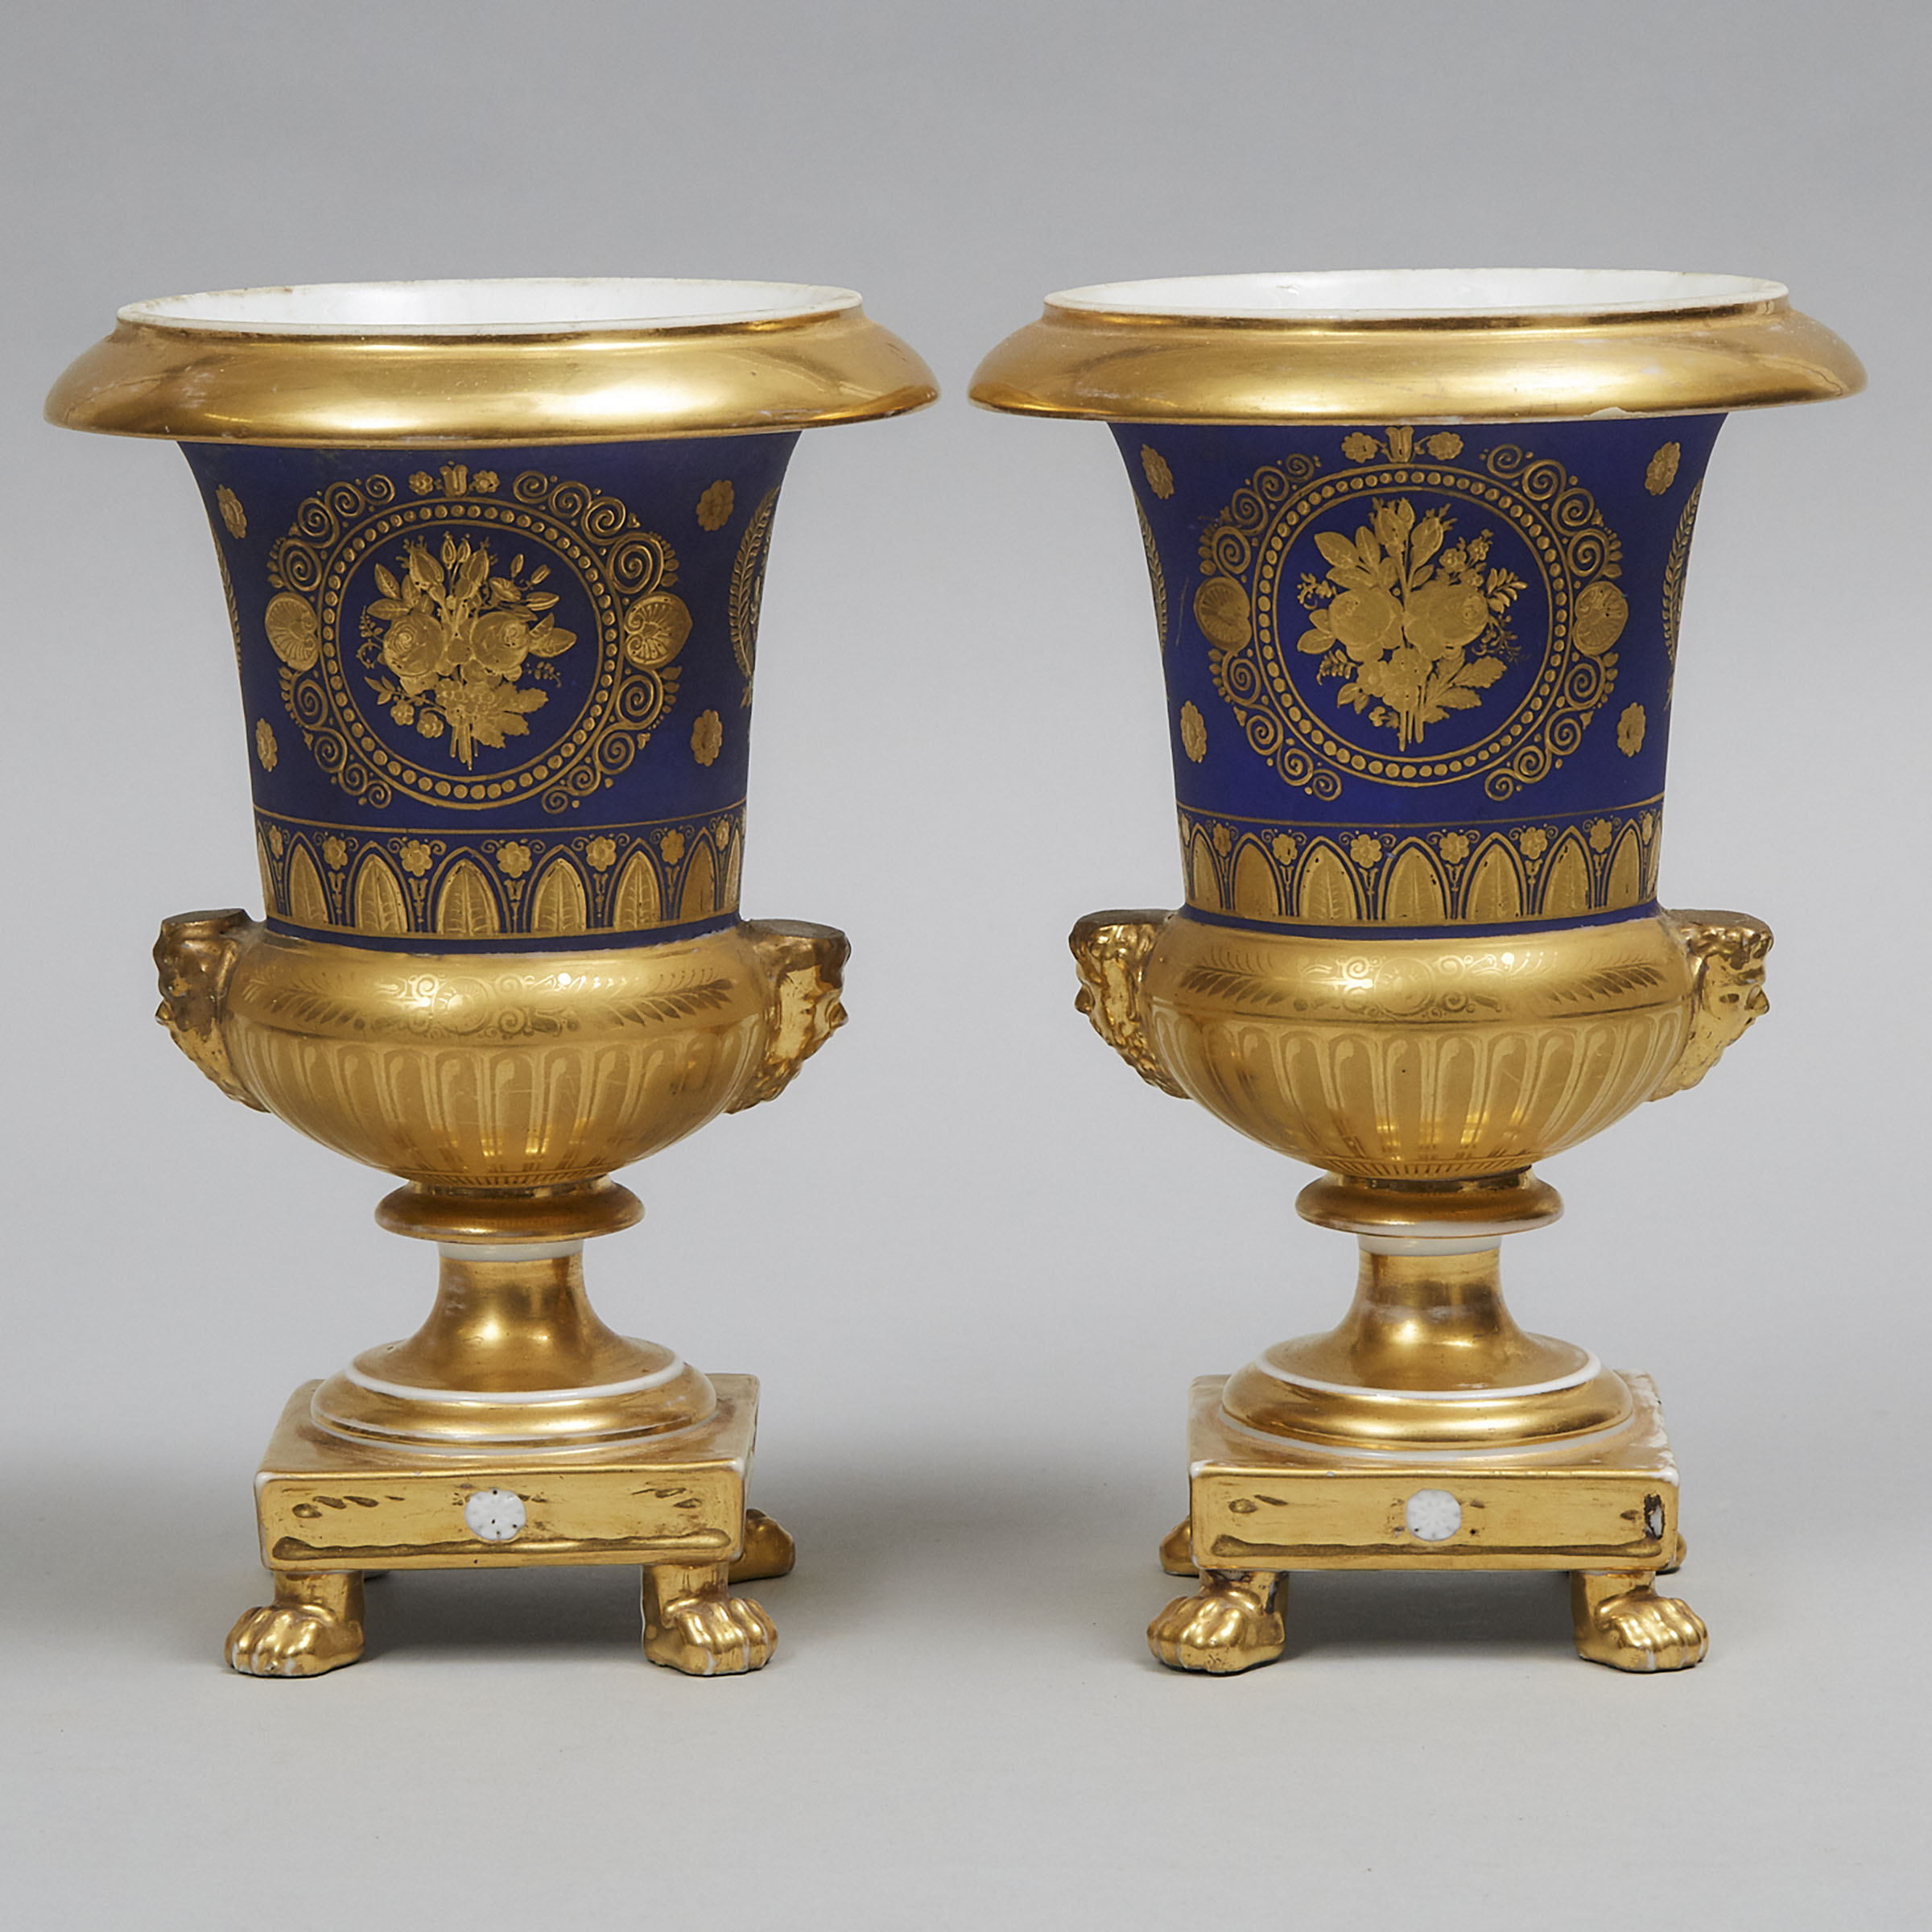 Pair of French Porcelain Empire Style Vases, 19th century